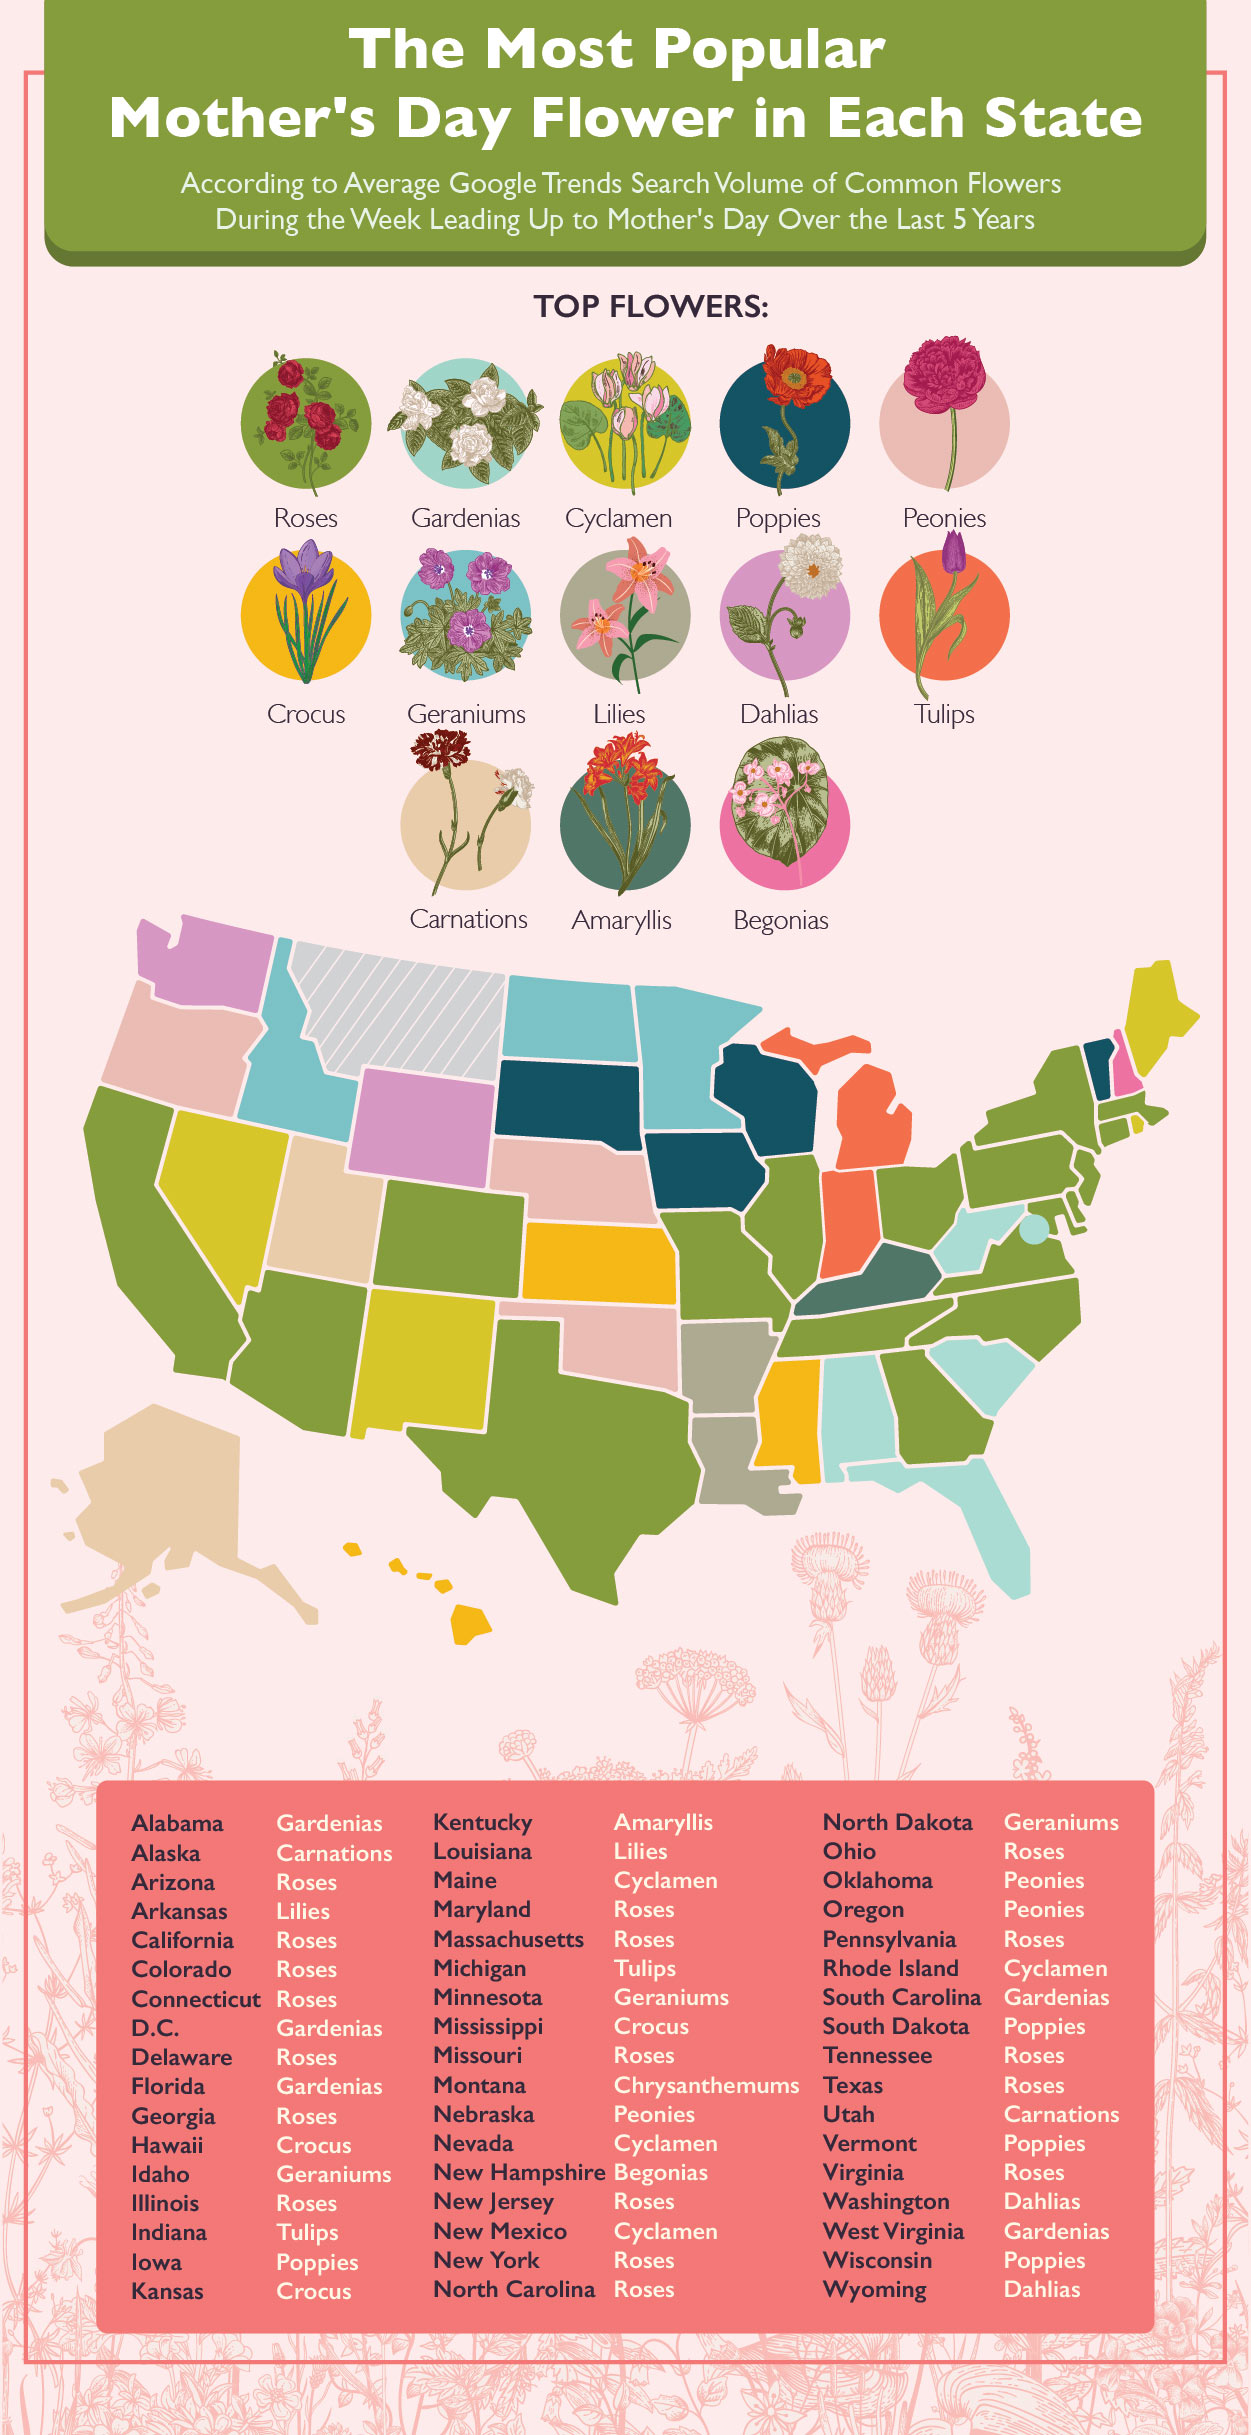 A map of the most popular Mother’s Day flower in each state